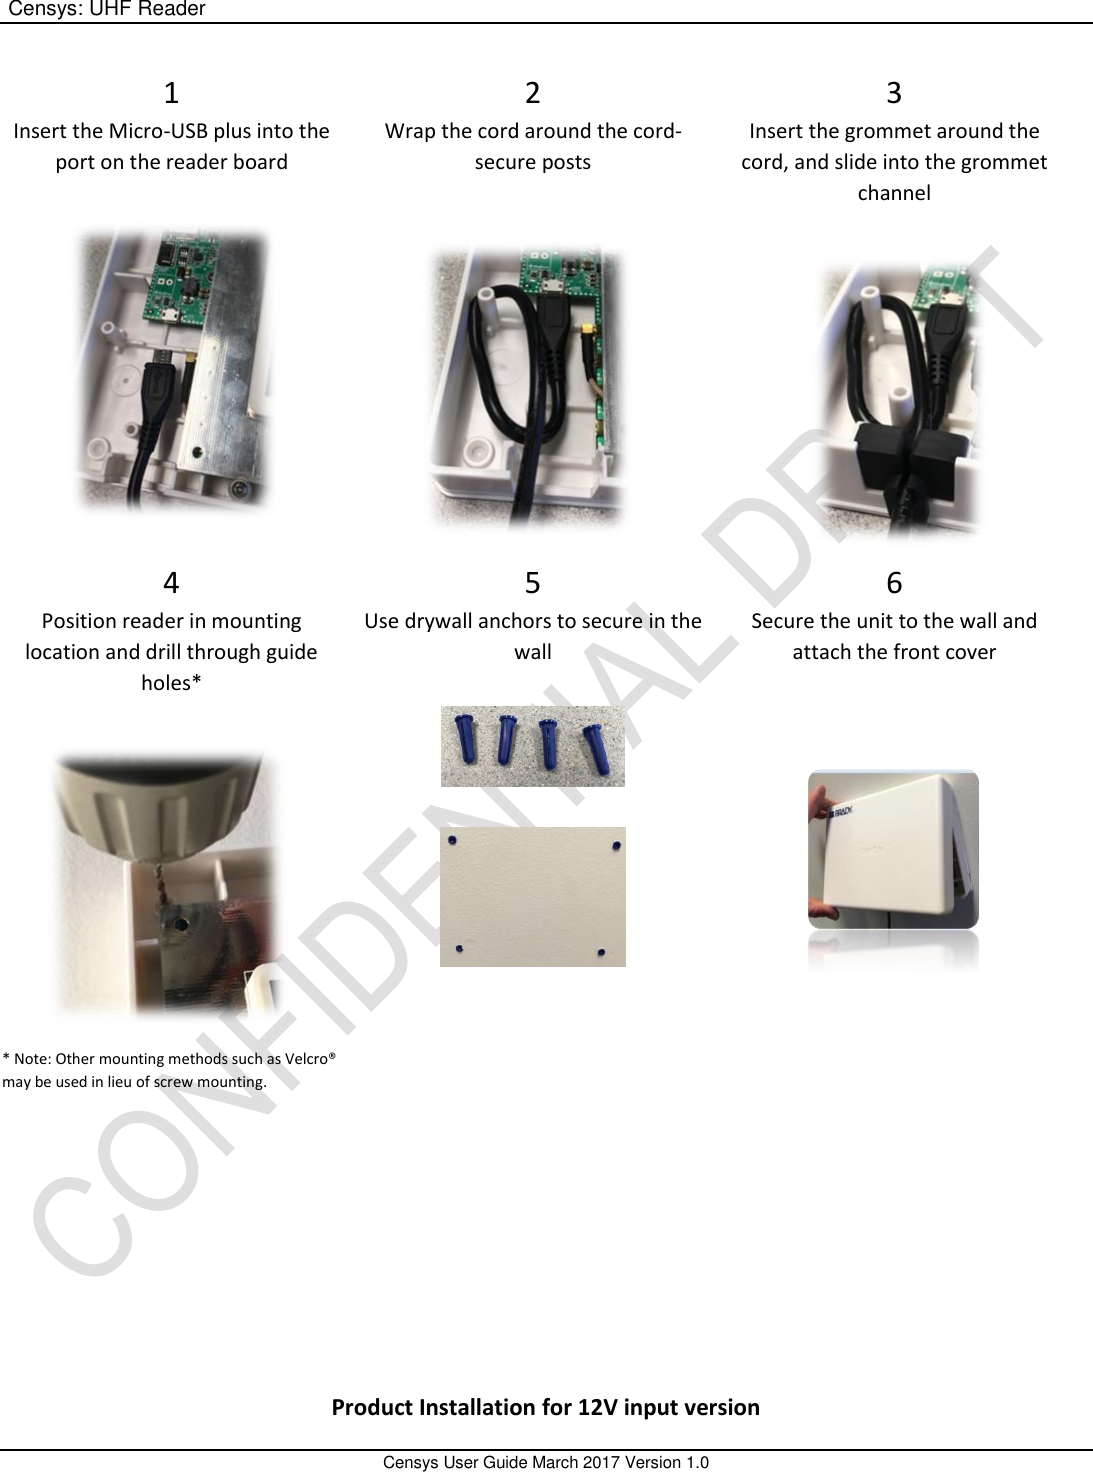  Censys: UHF Reader       Censys User Guide March 2017 Version 1.0  1 Insert the Micro-USB plus into the port on the reader board   2 Wrap the cord around the cord-secure posts  3 Insert the grommet around the cord, and slide into the grommet channel 4 Position reader in mounting location and drill through guide holes*  * Note: Other mounting methods such as Velcro® may be used in lieu of screw mounting.  5 Use drywall anchors to secure in the wall   6 Secure the unit to the wall and attach the front cover       Product Installation for 12V input version 